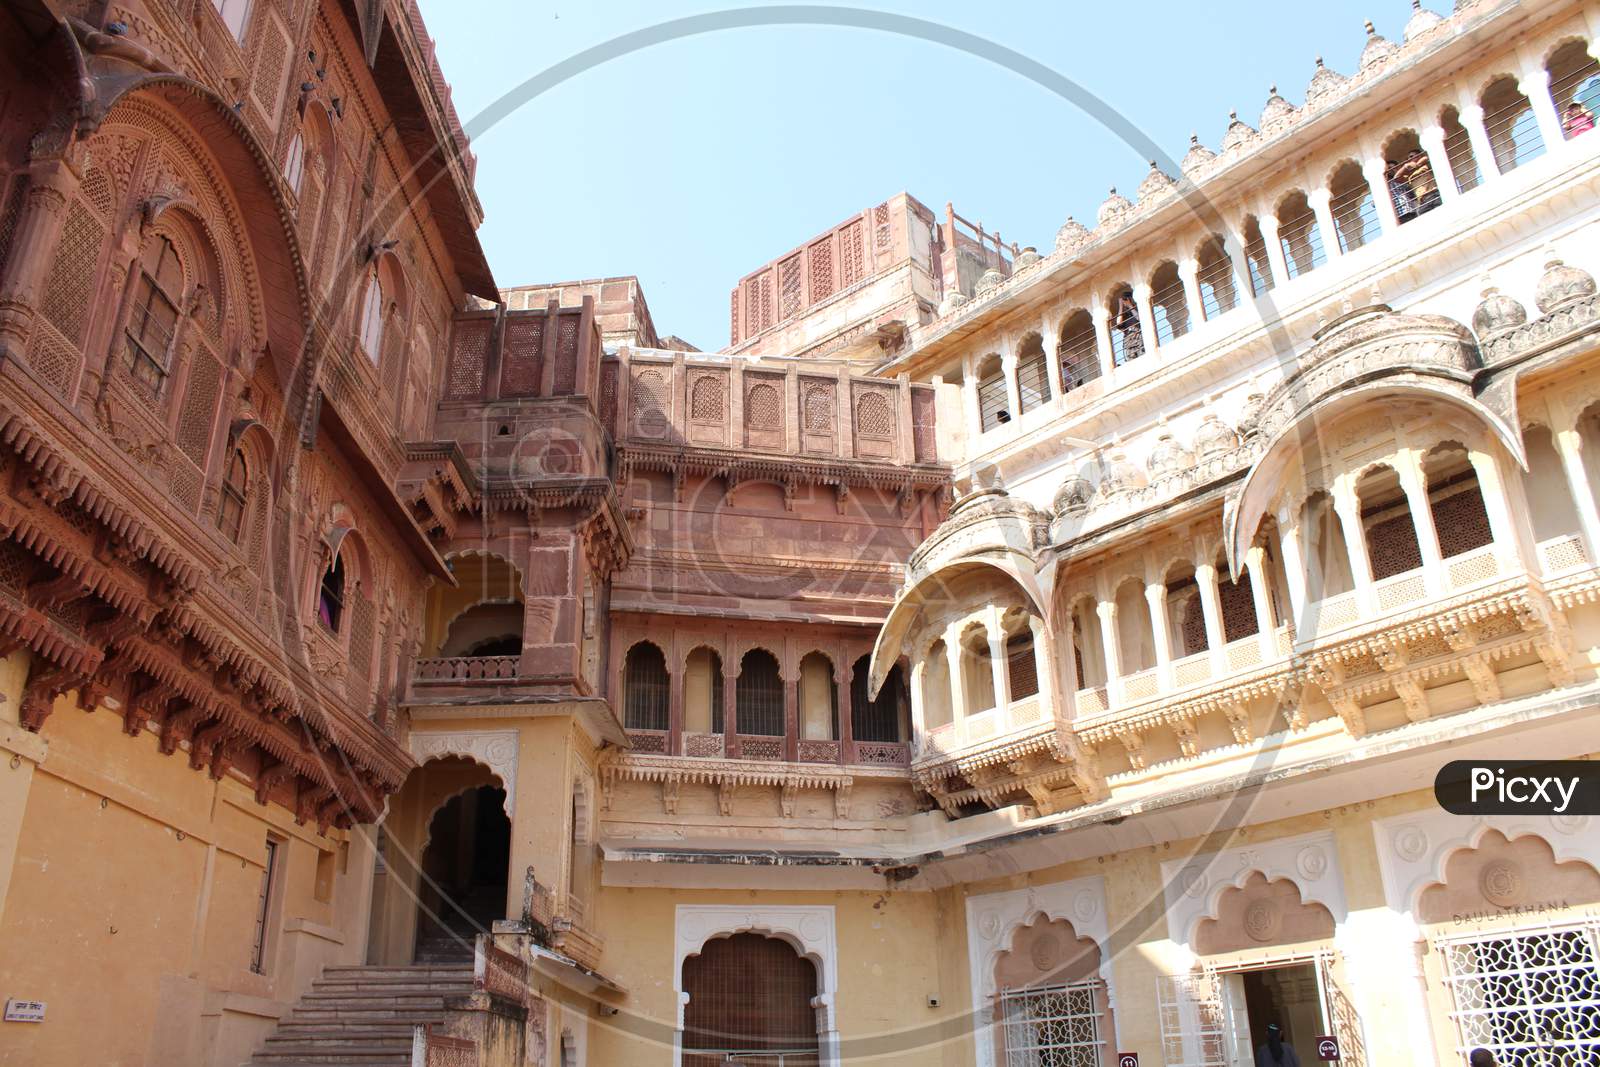 view of a portion of the famous Mehrangarh Fort in Jodhpur